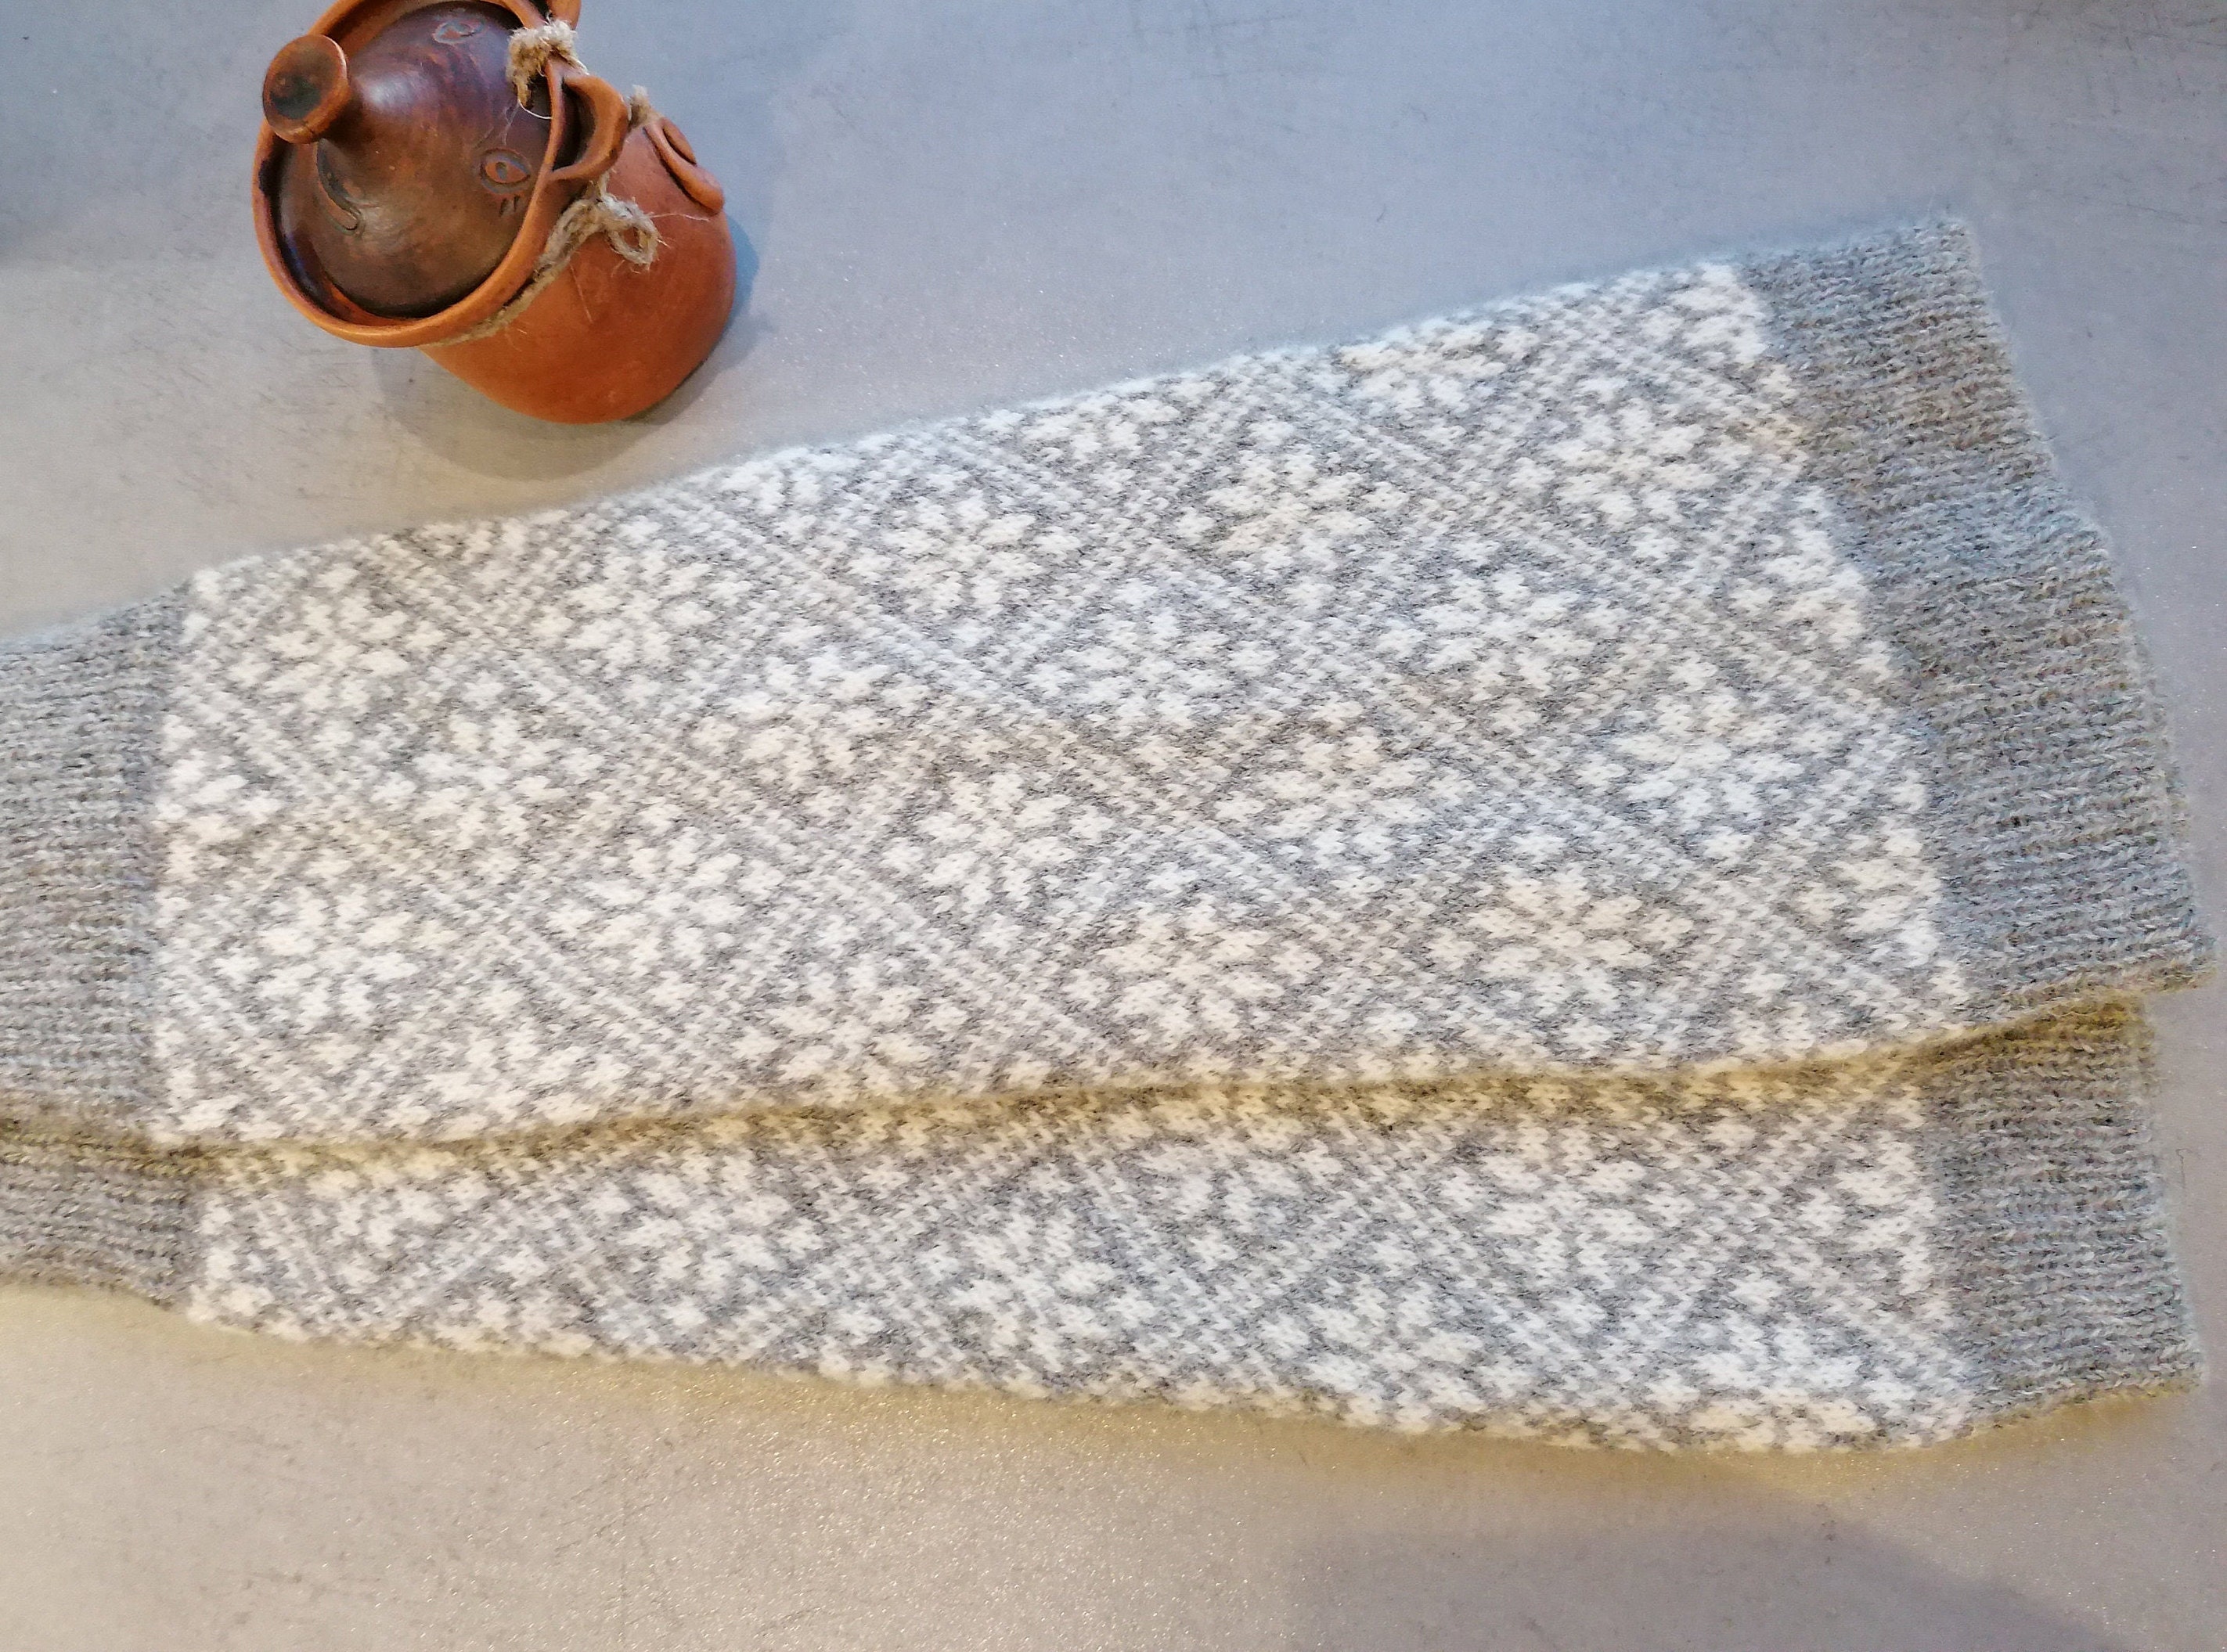 Fair Isle Leg Warmers, Wide Calf Model, Finely Knitted Nordic Star Pattern  Grey and White Combination 